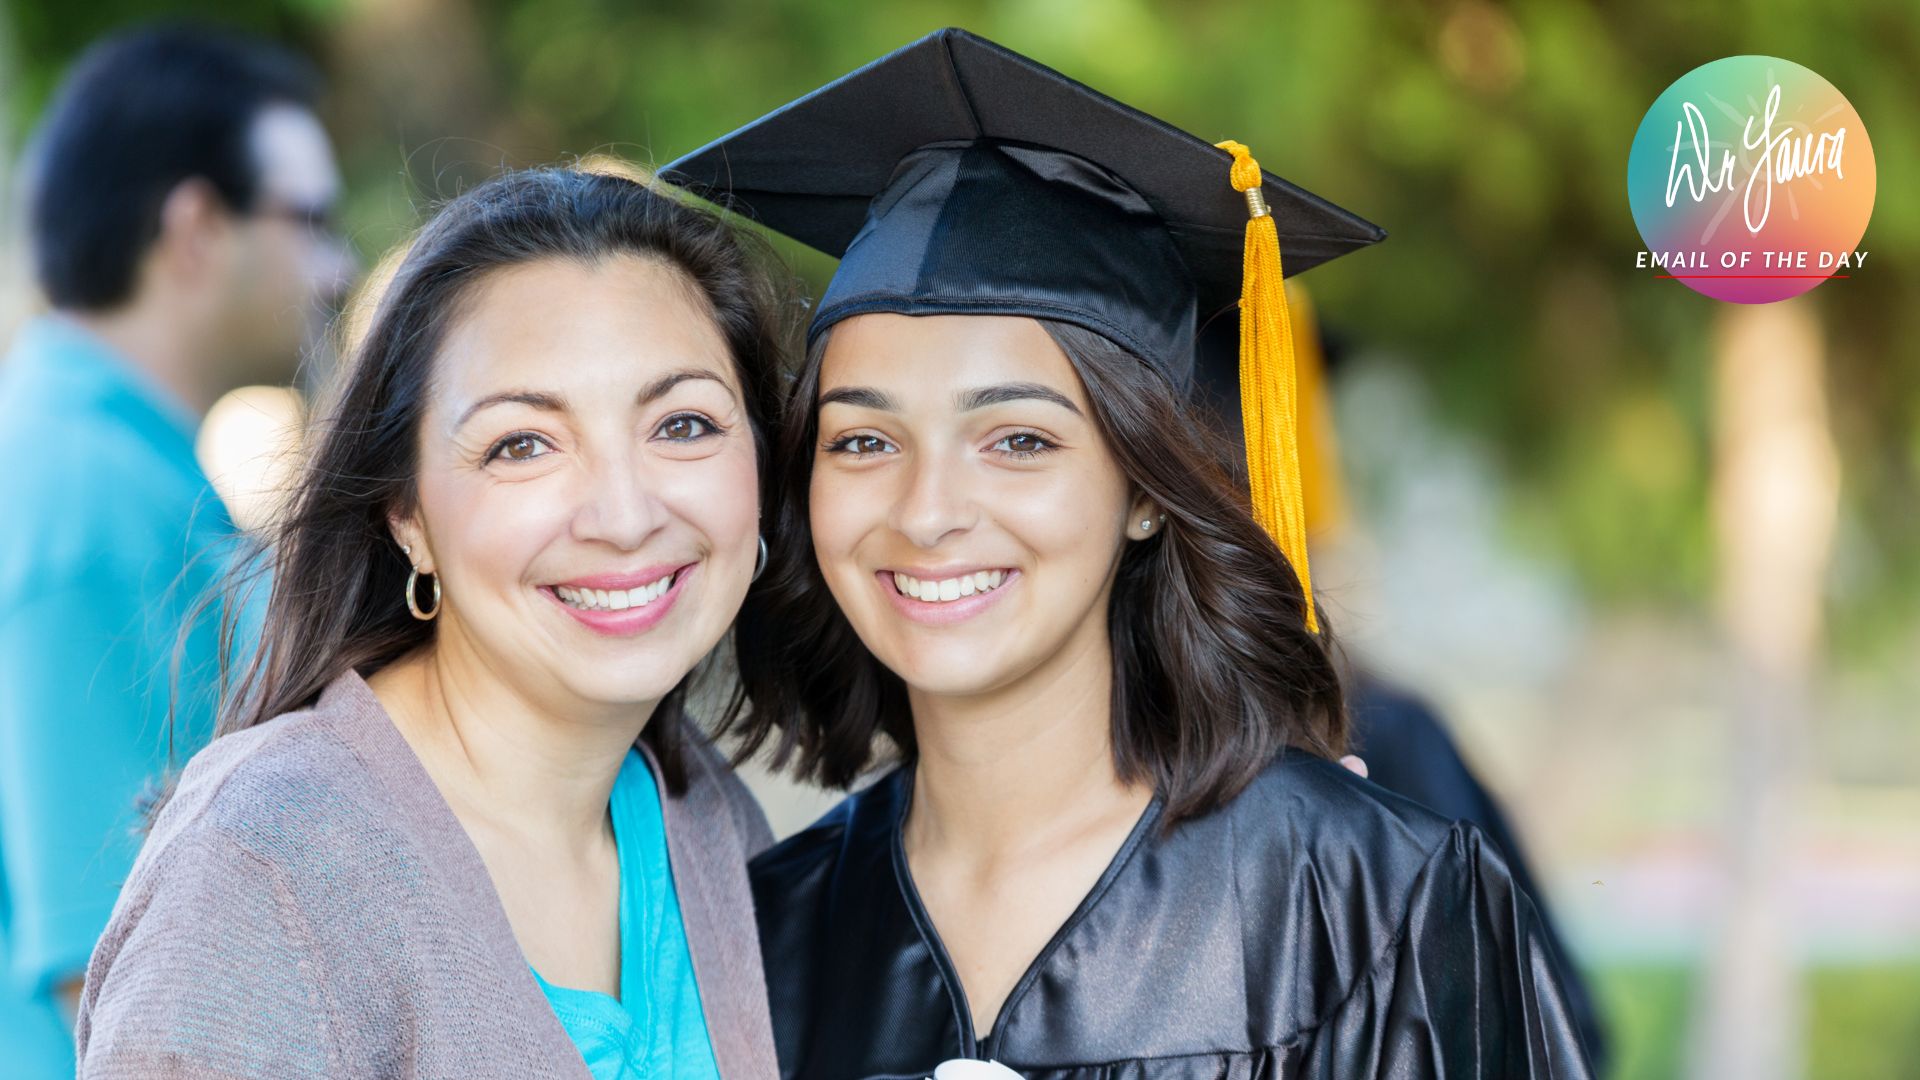 Young woman in graduation gown and cap smiles with woman in grey cardigan smiling next to her